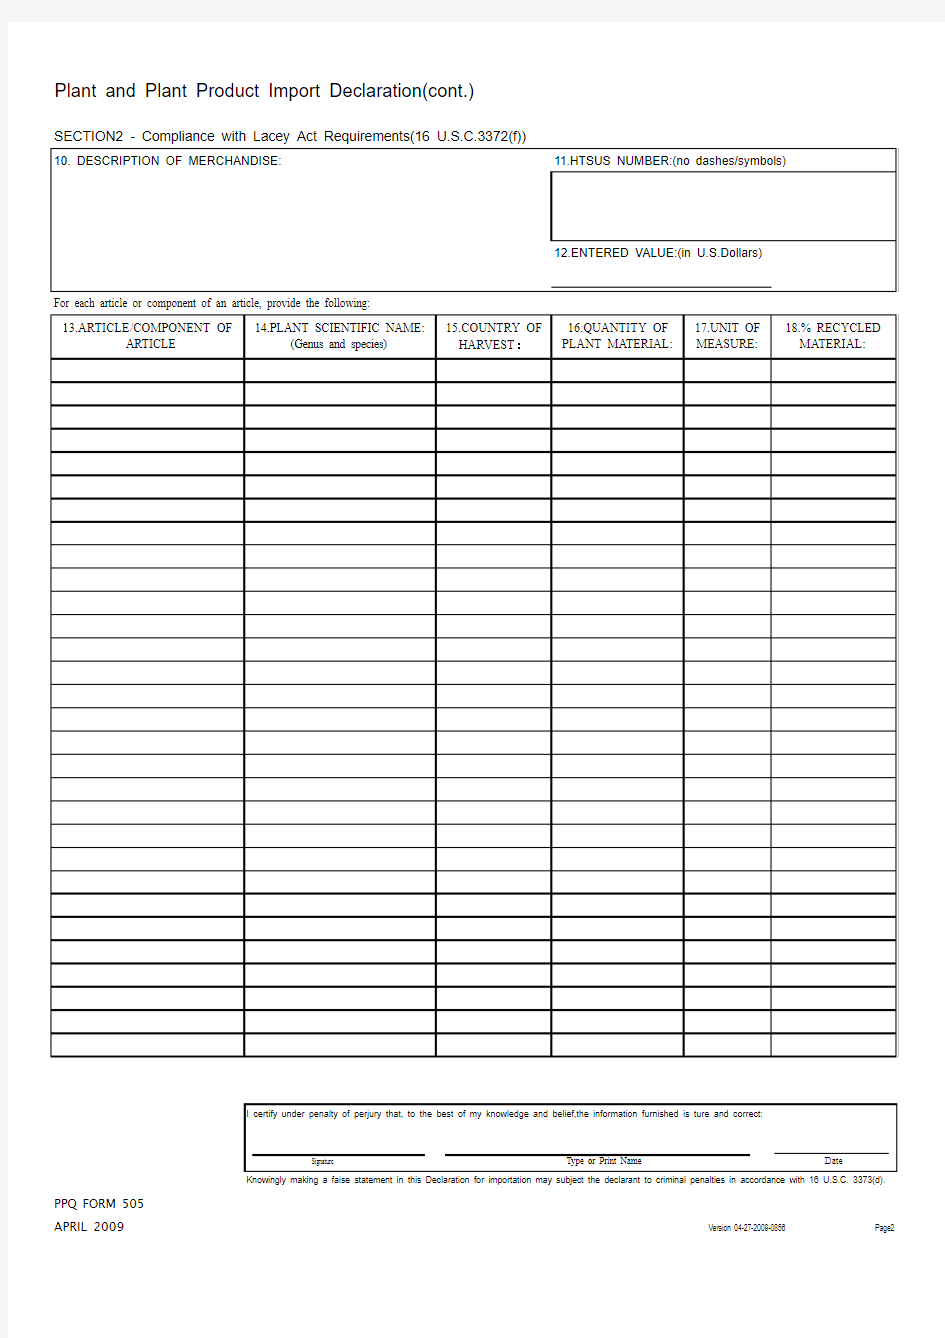 Plant and Plant Product Declaration Form